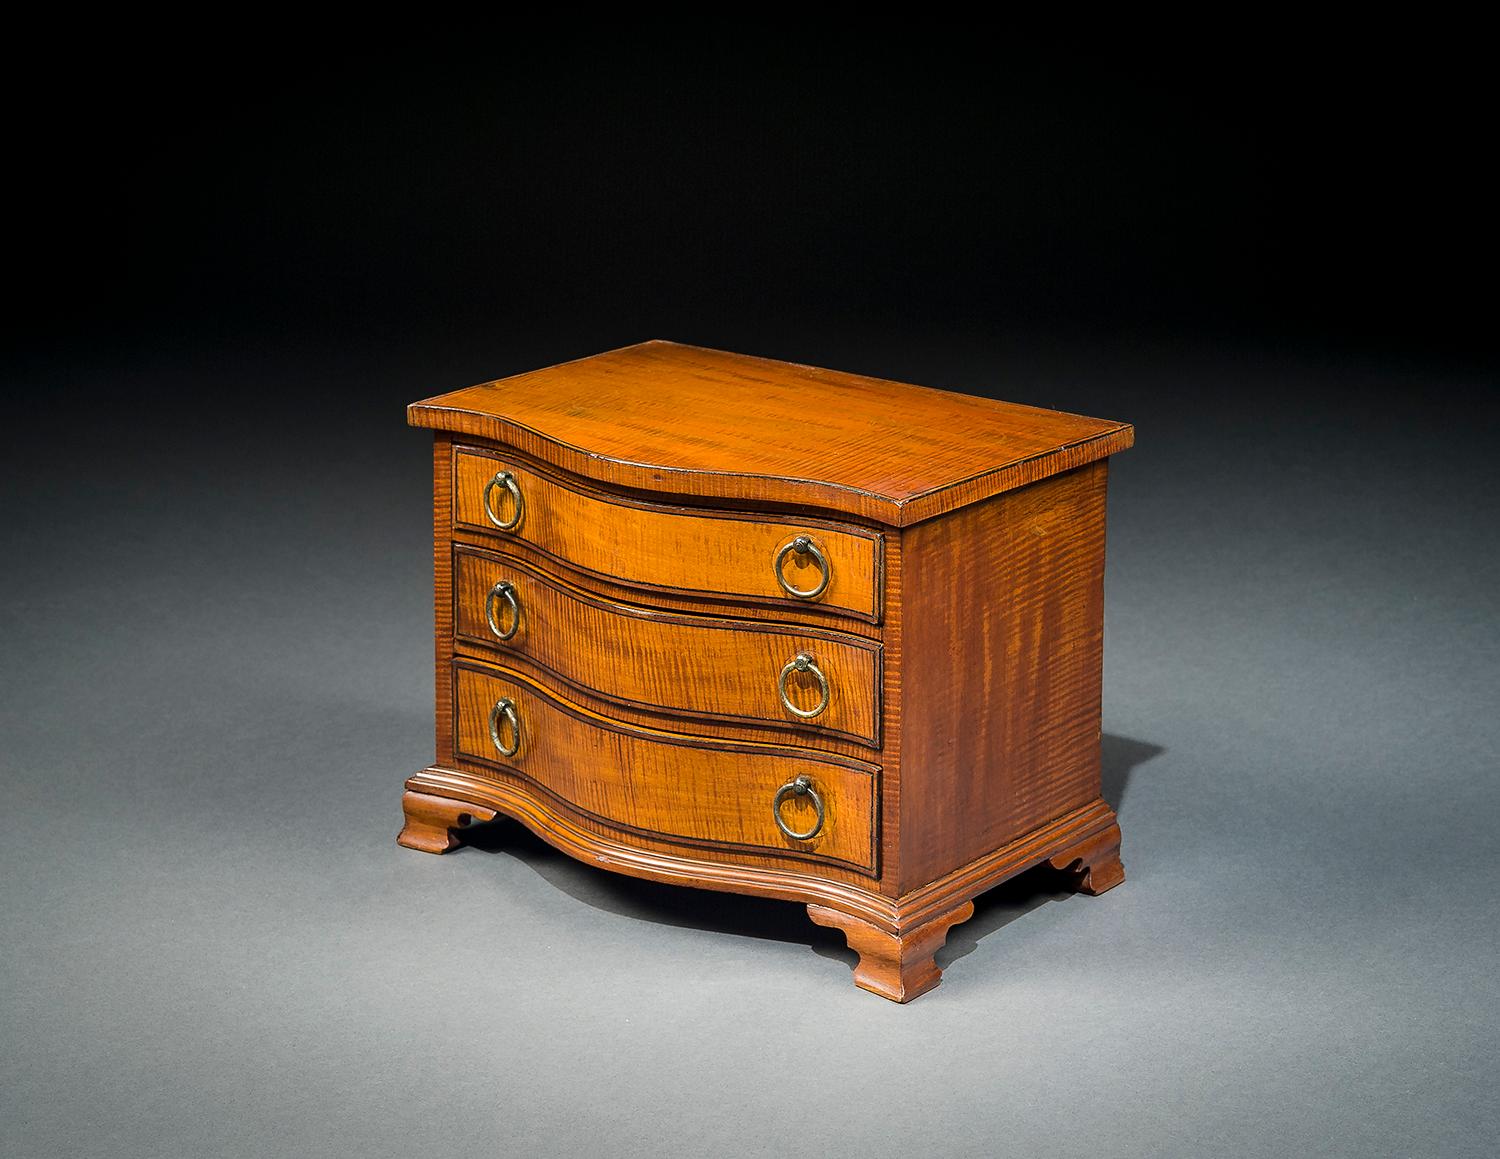 American, probably Boston or Salem, Massachusetts
Miniature Serpentine Chest of Drawers, circa 1785-1800
Striped maple, ebony, and rosewood (secondary woods: mahogany), with brass drawer pulls
Measures: 7 7/8 in. high, 10 1/2 in. wide, 7 3/16 in.